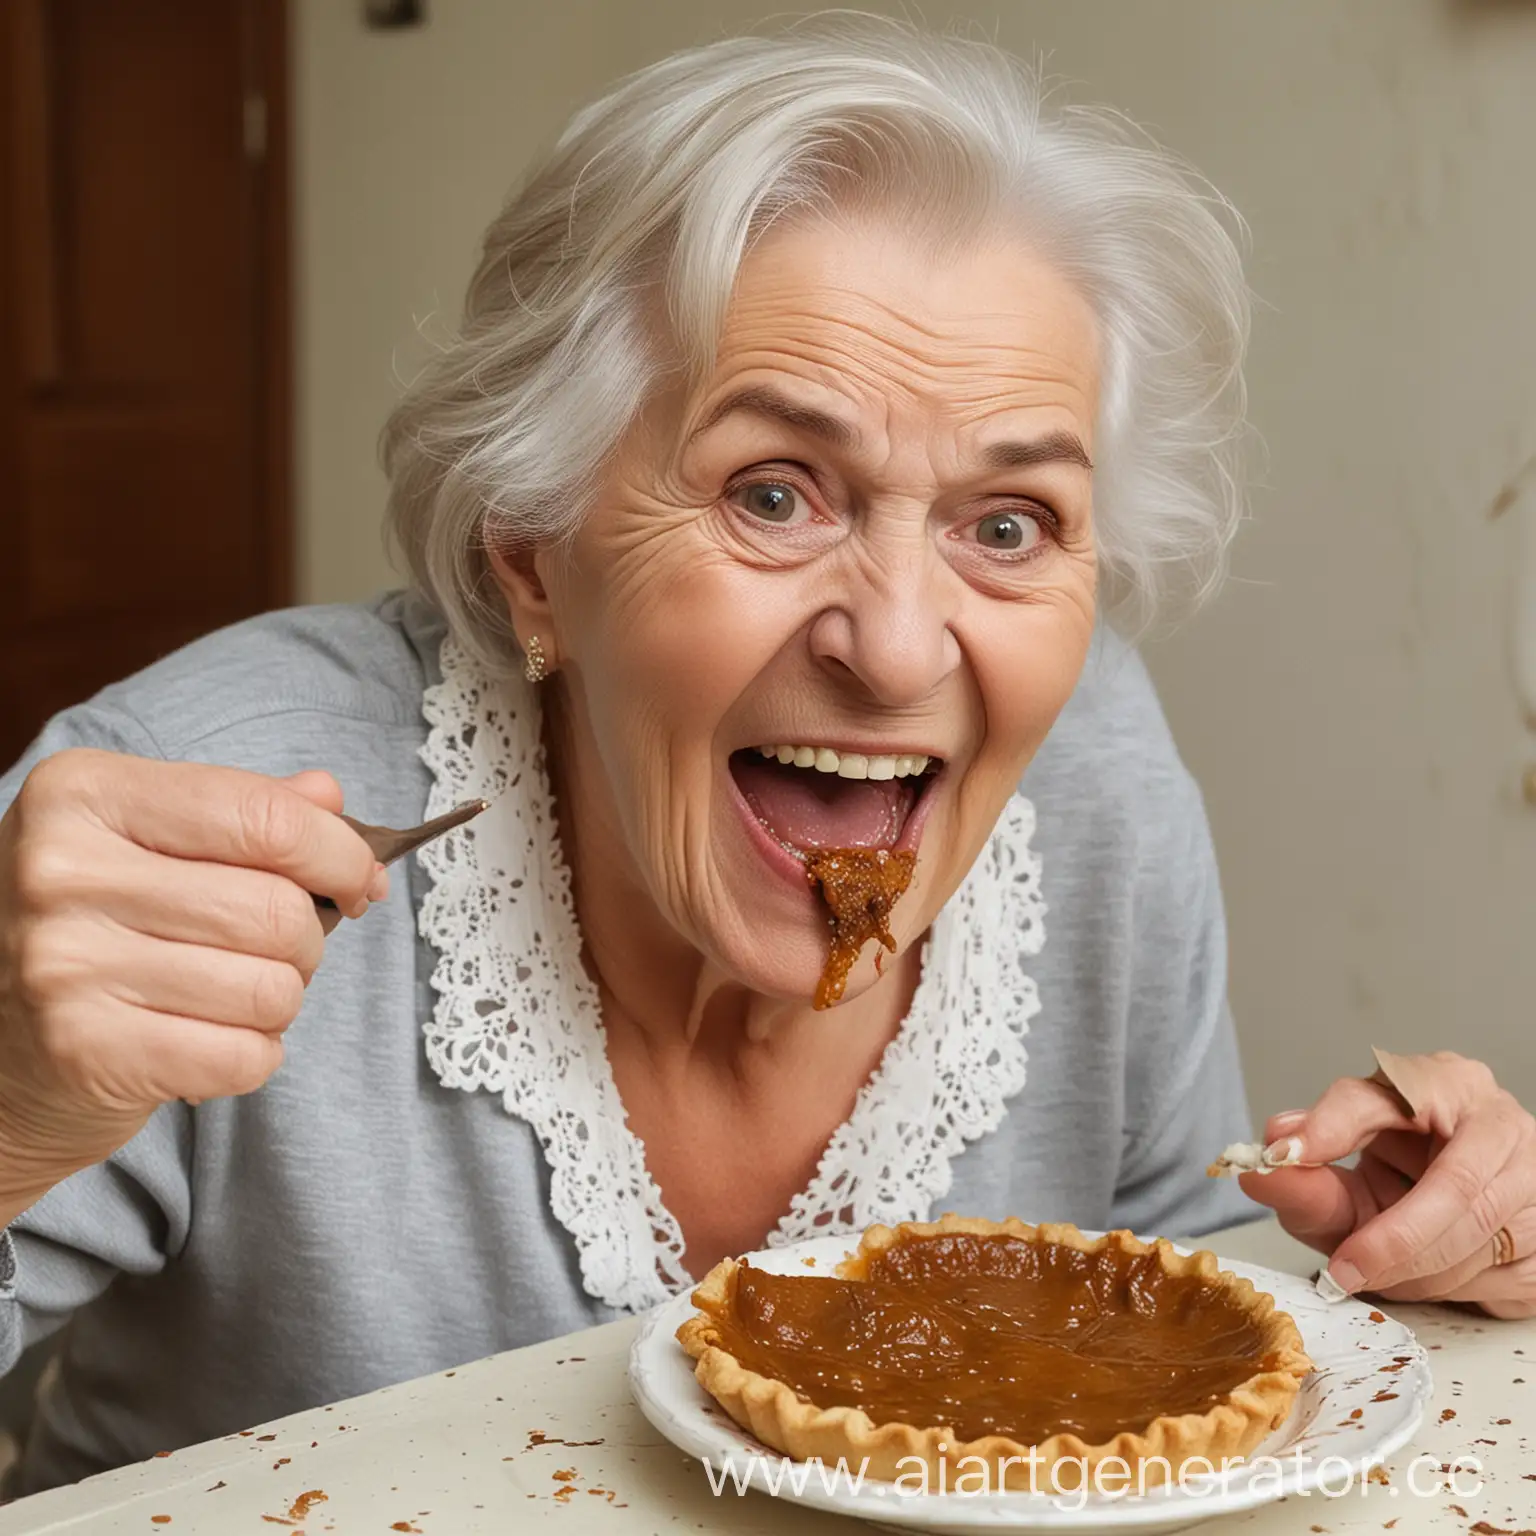 Eccentric-Granny-Galina-Bakes-Liver-Pies-for-Granddaughter